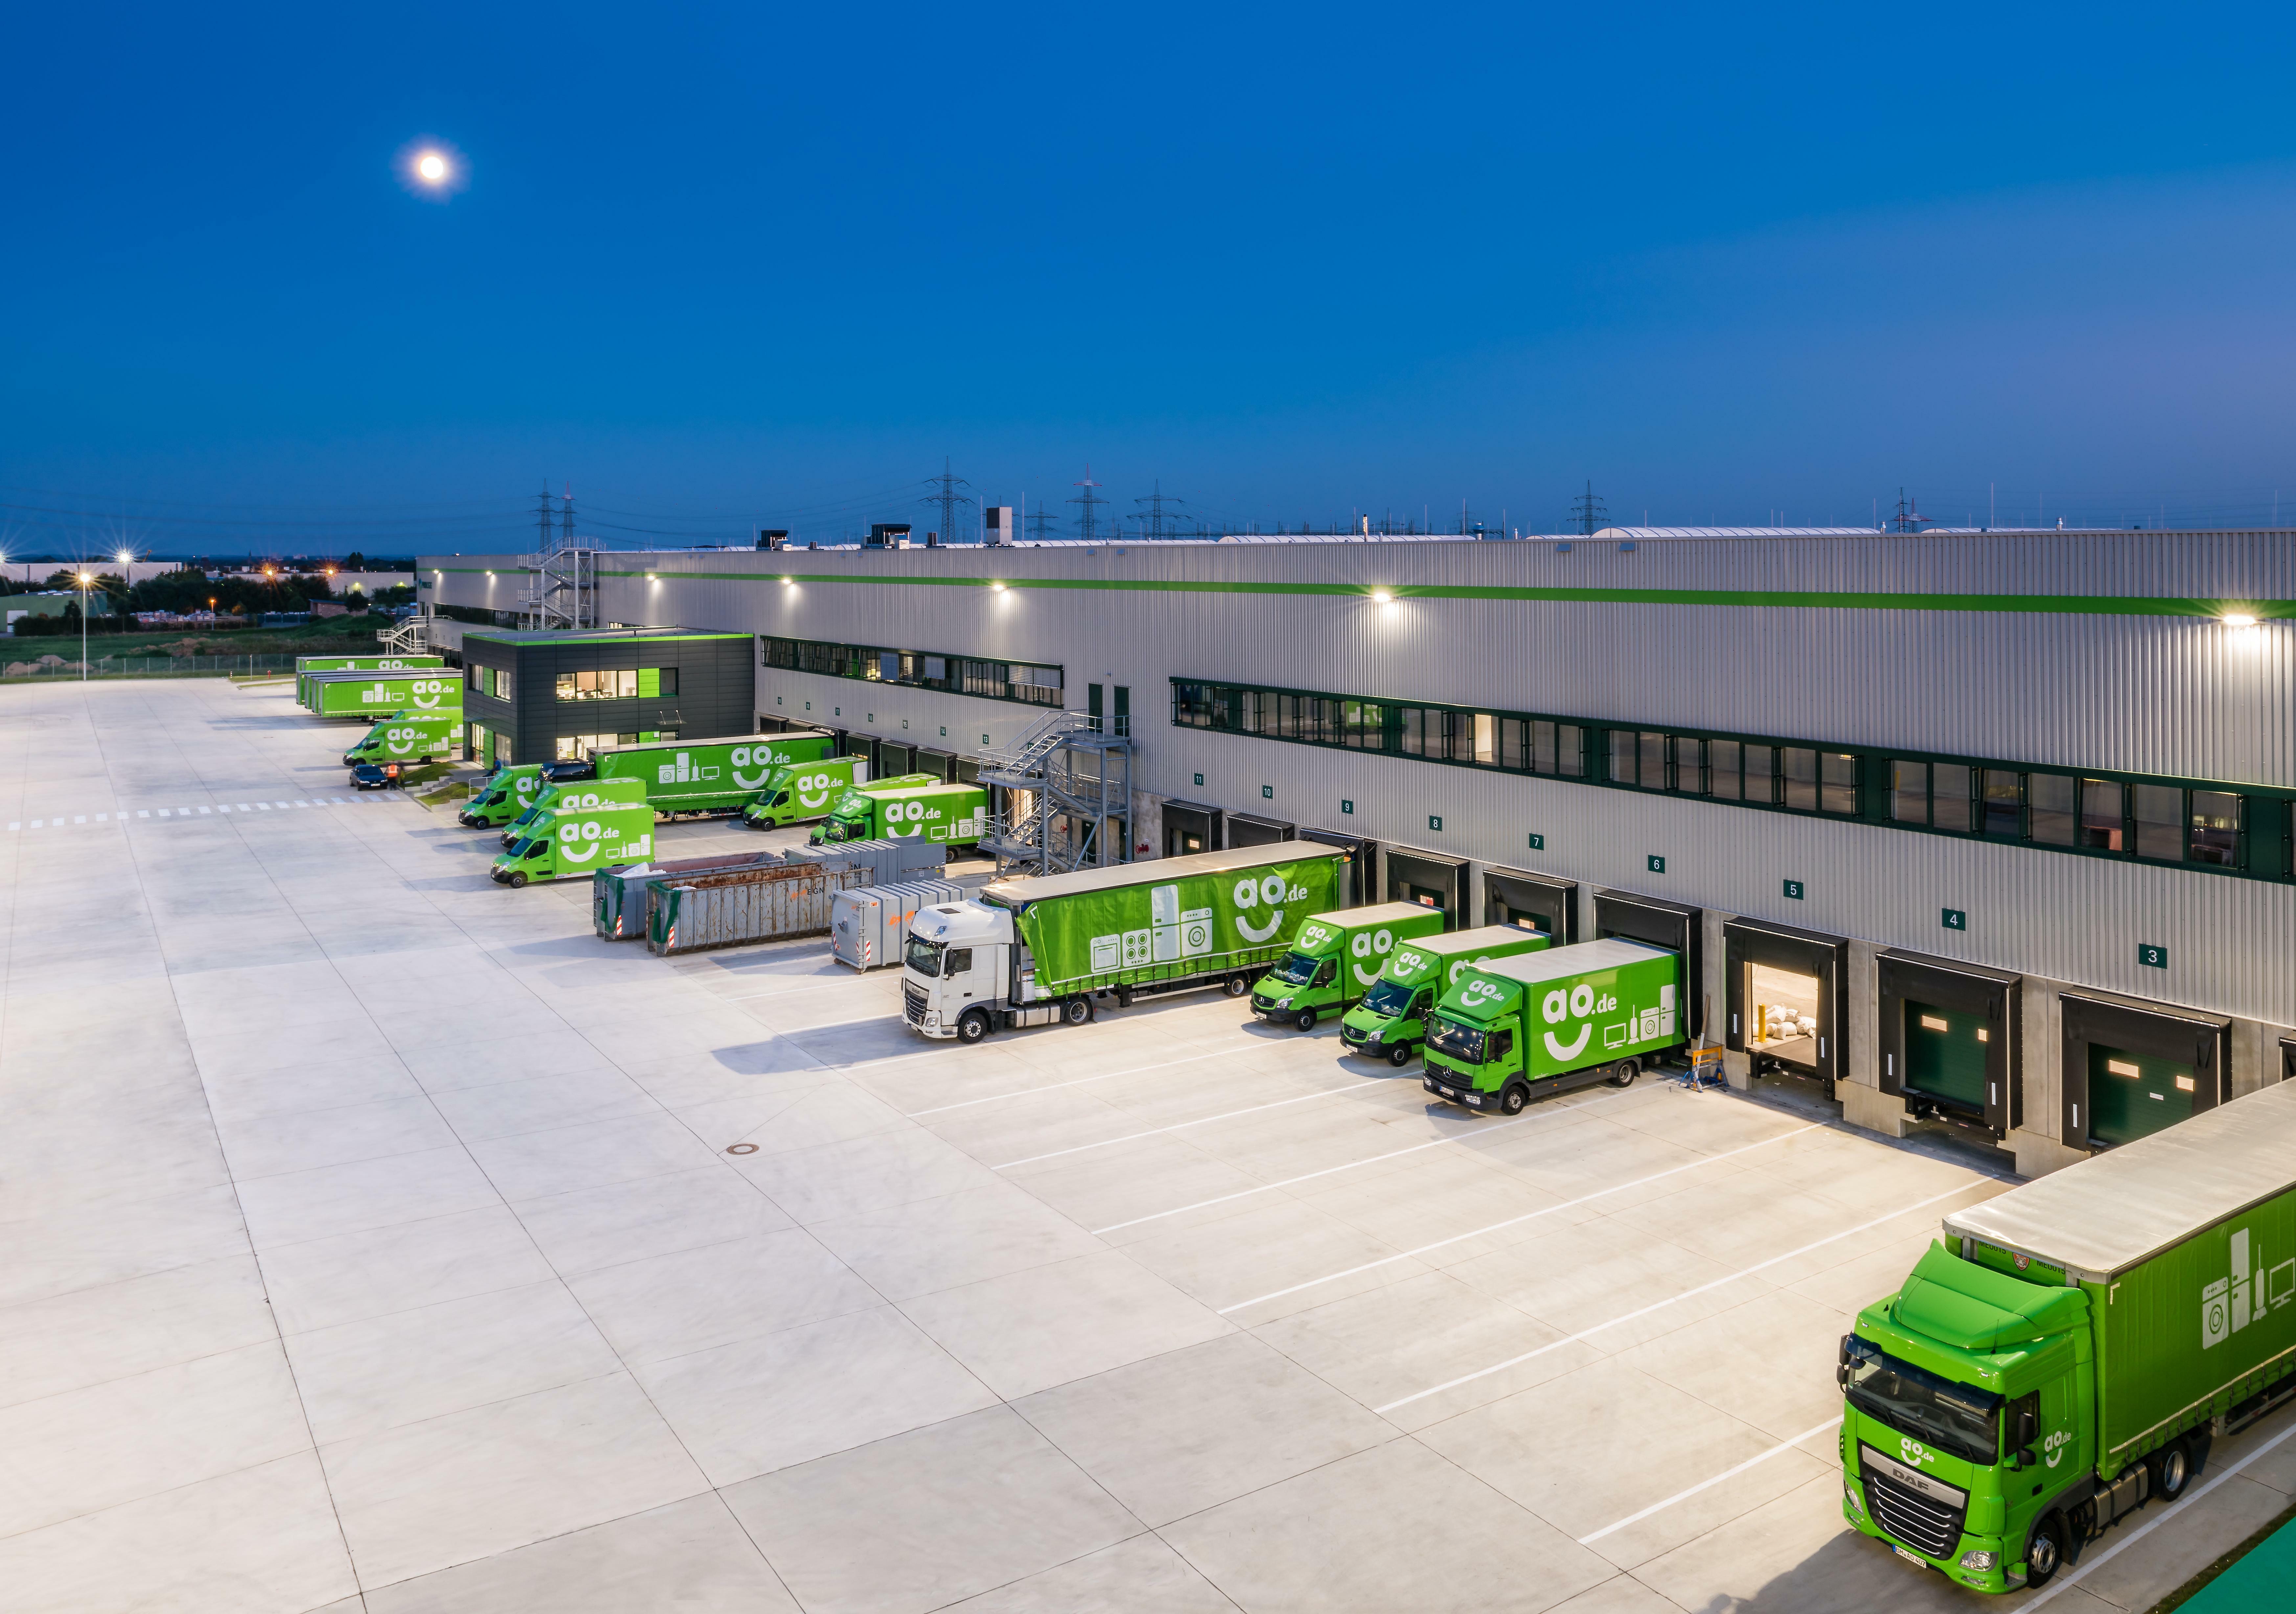 Build-to-Suit for AO World in Bergheim, Germany | Prologis Germany